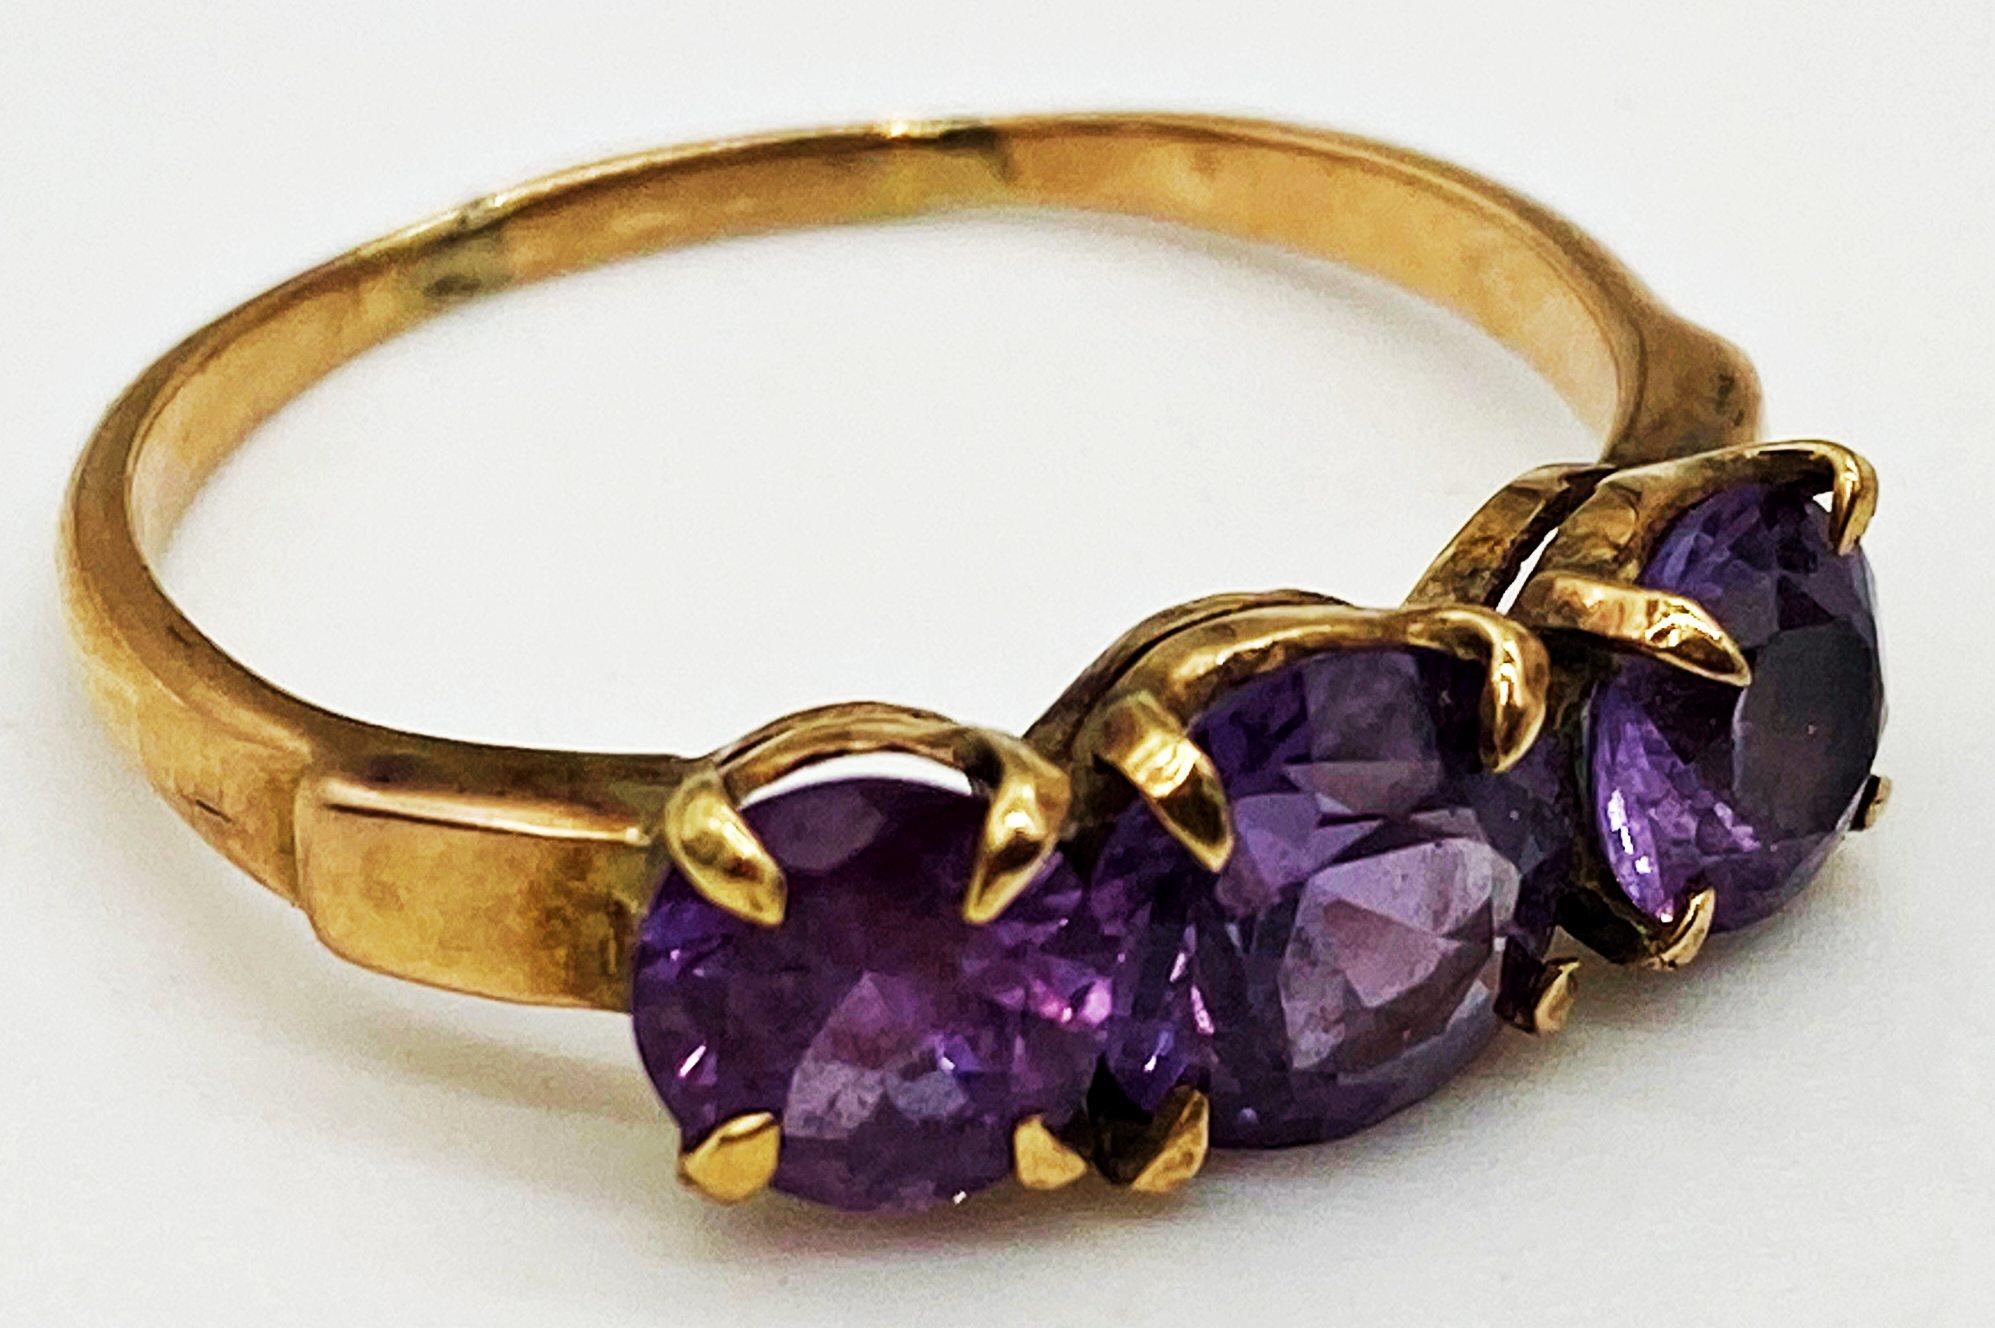 14ct gold ring set with 3 graduated Amethyst stones. Size S, weight 2.6 grams approx.